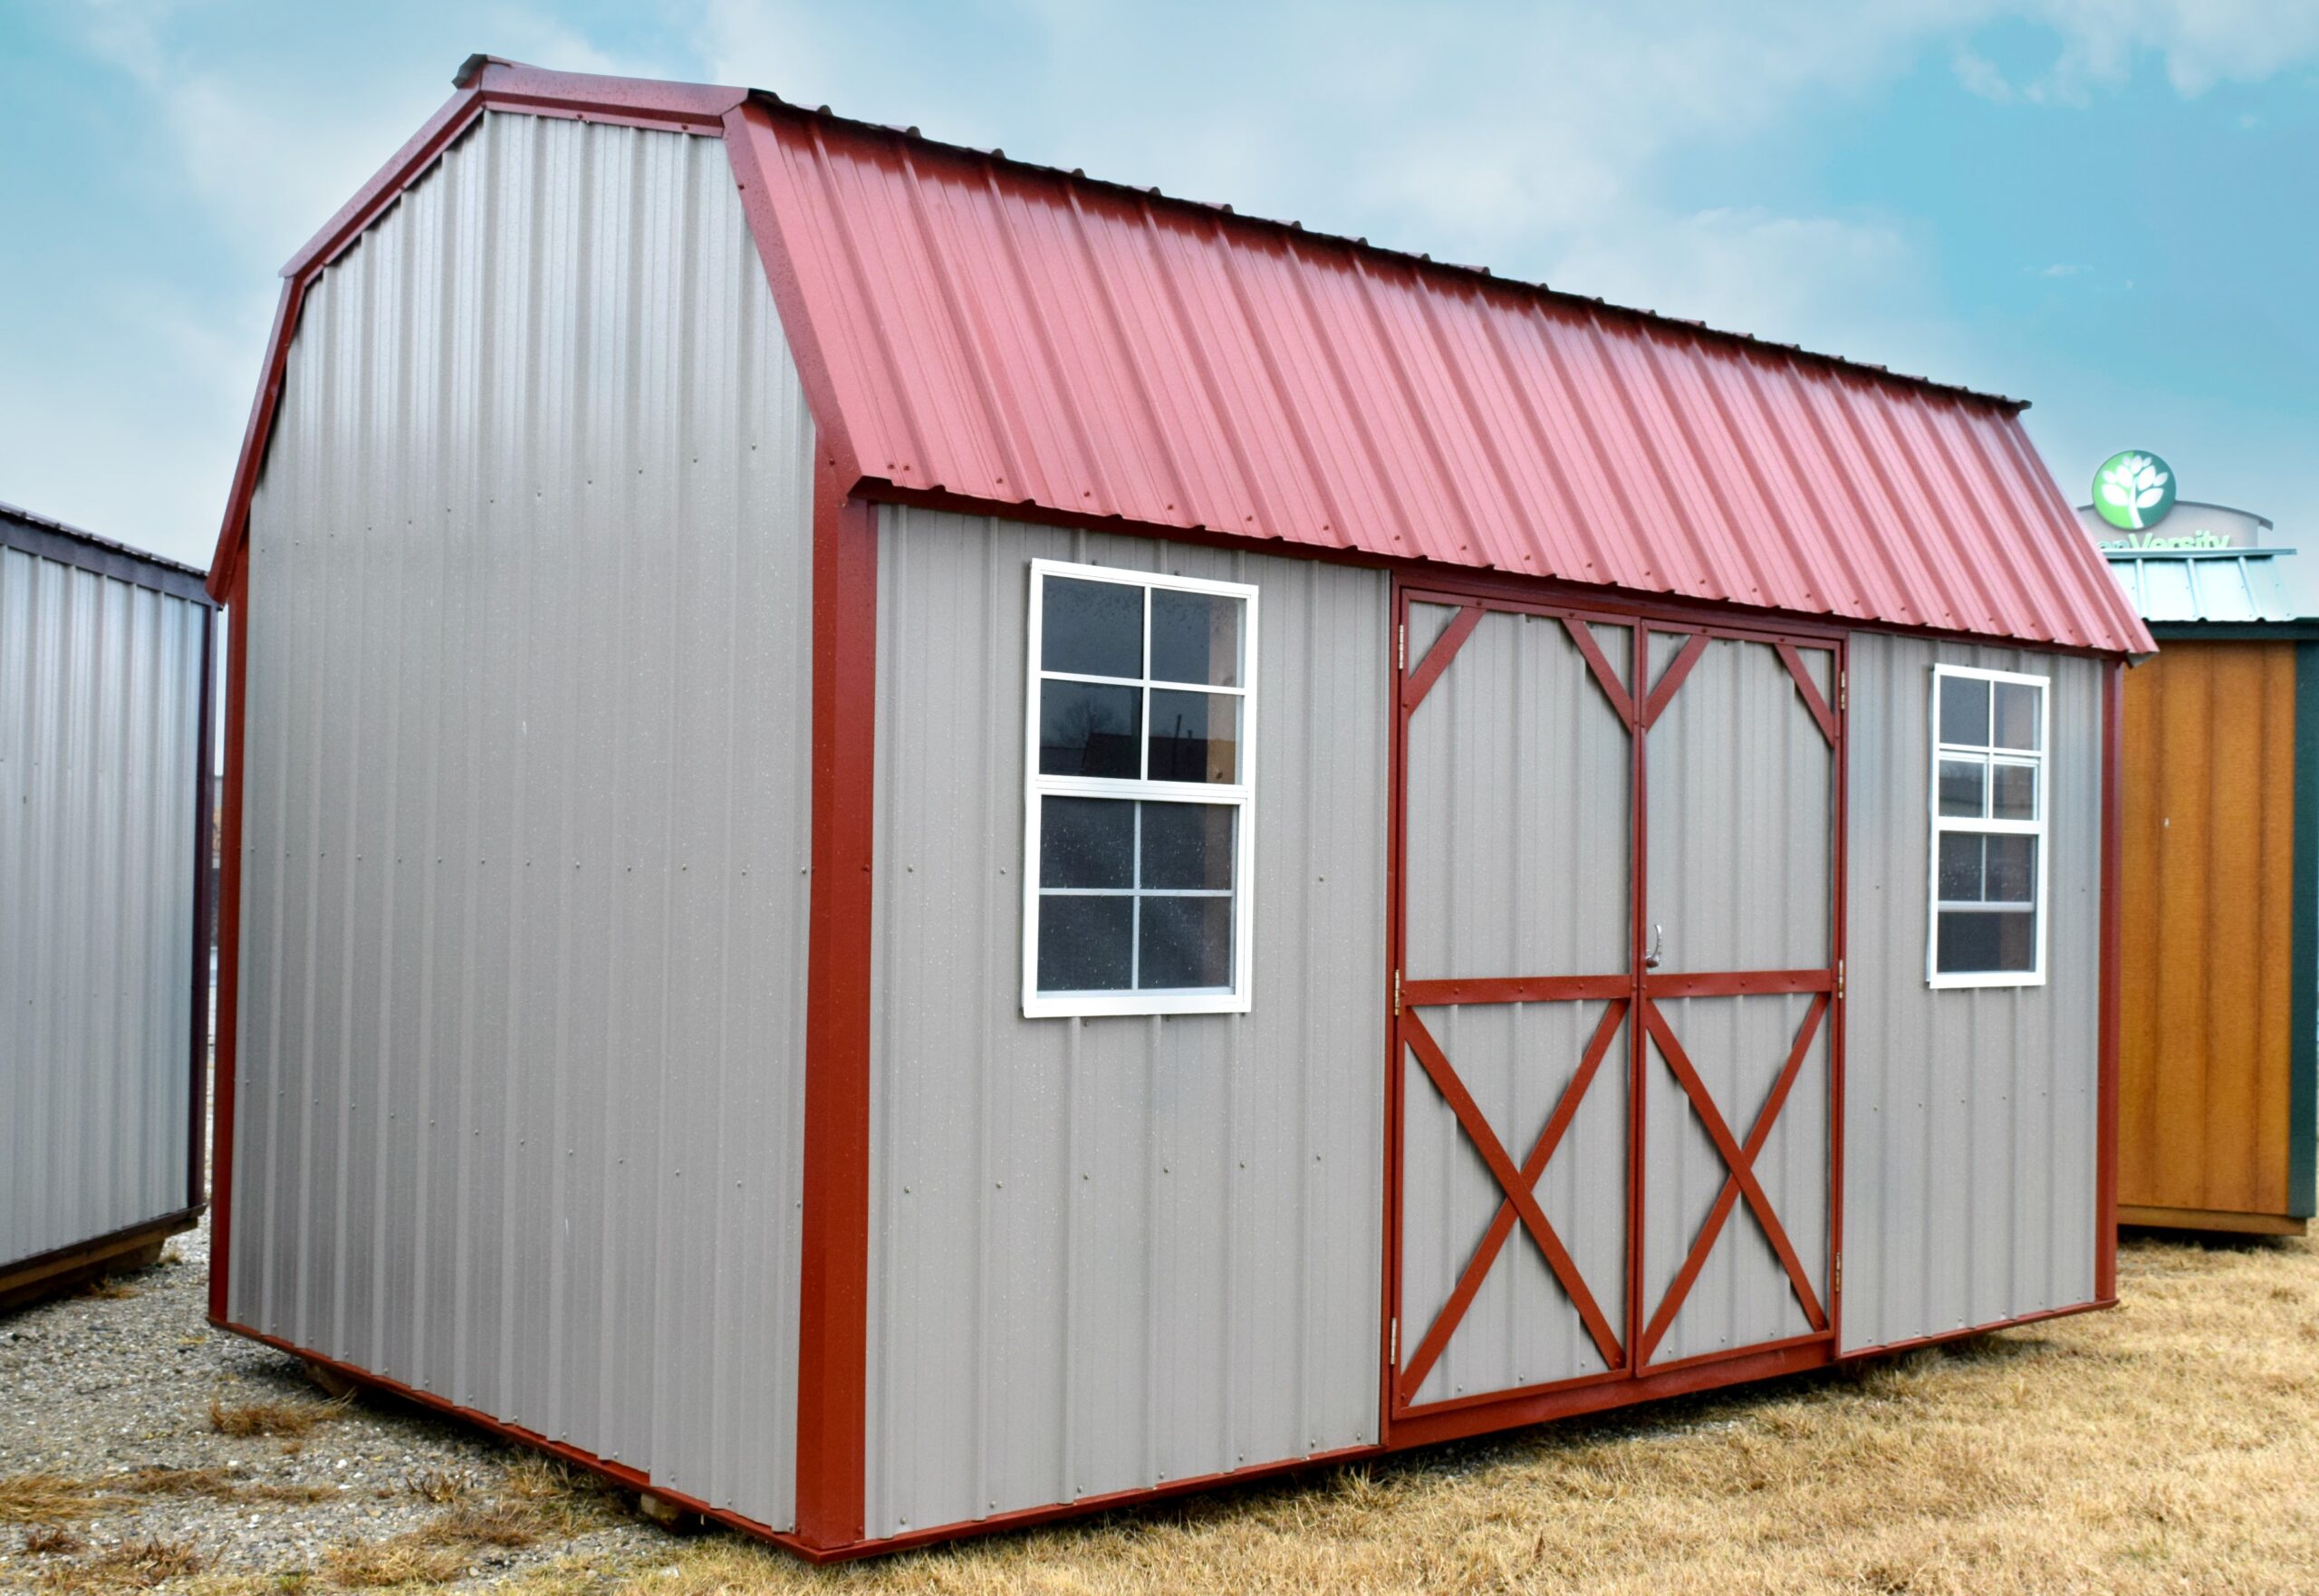 Gray side lofted shed with red trim and metal roof